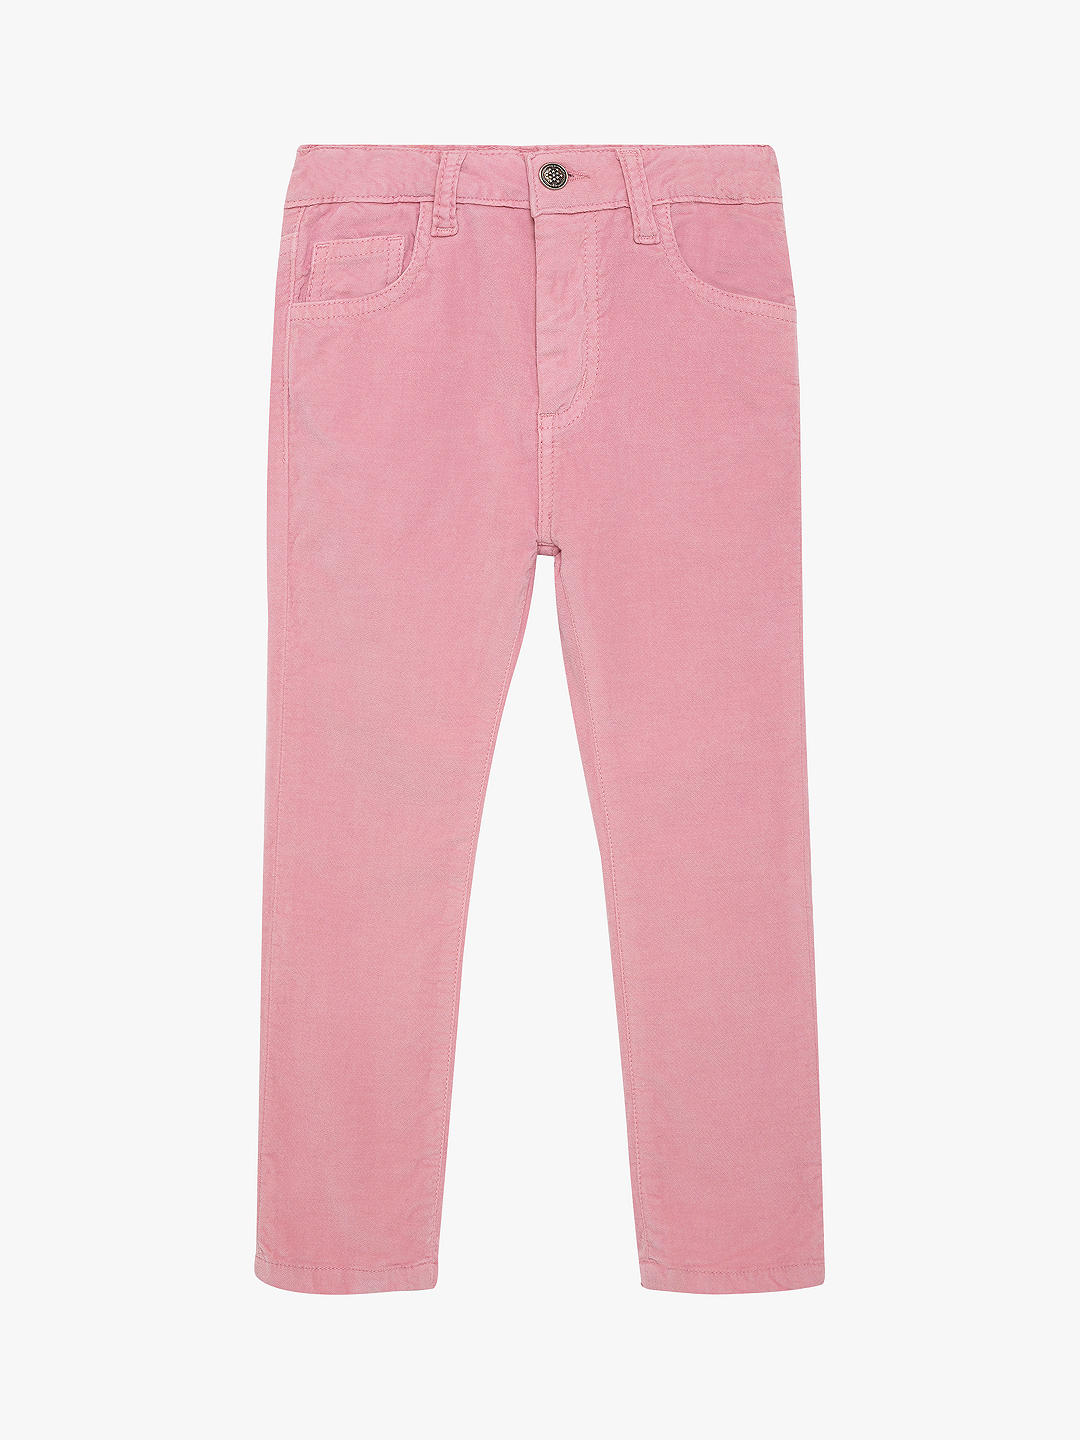 Trotters Confiture Kid's Jesse Jeans, Dusty Pink